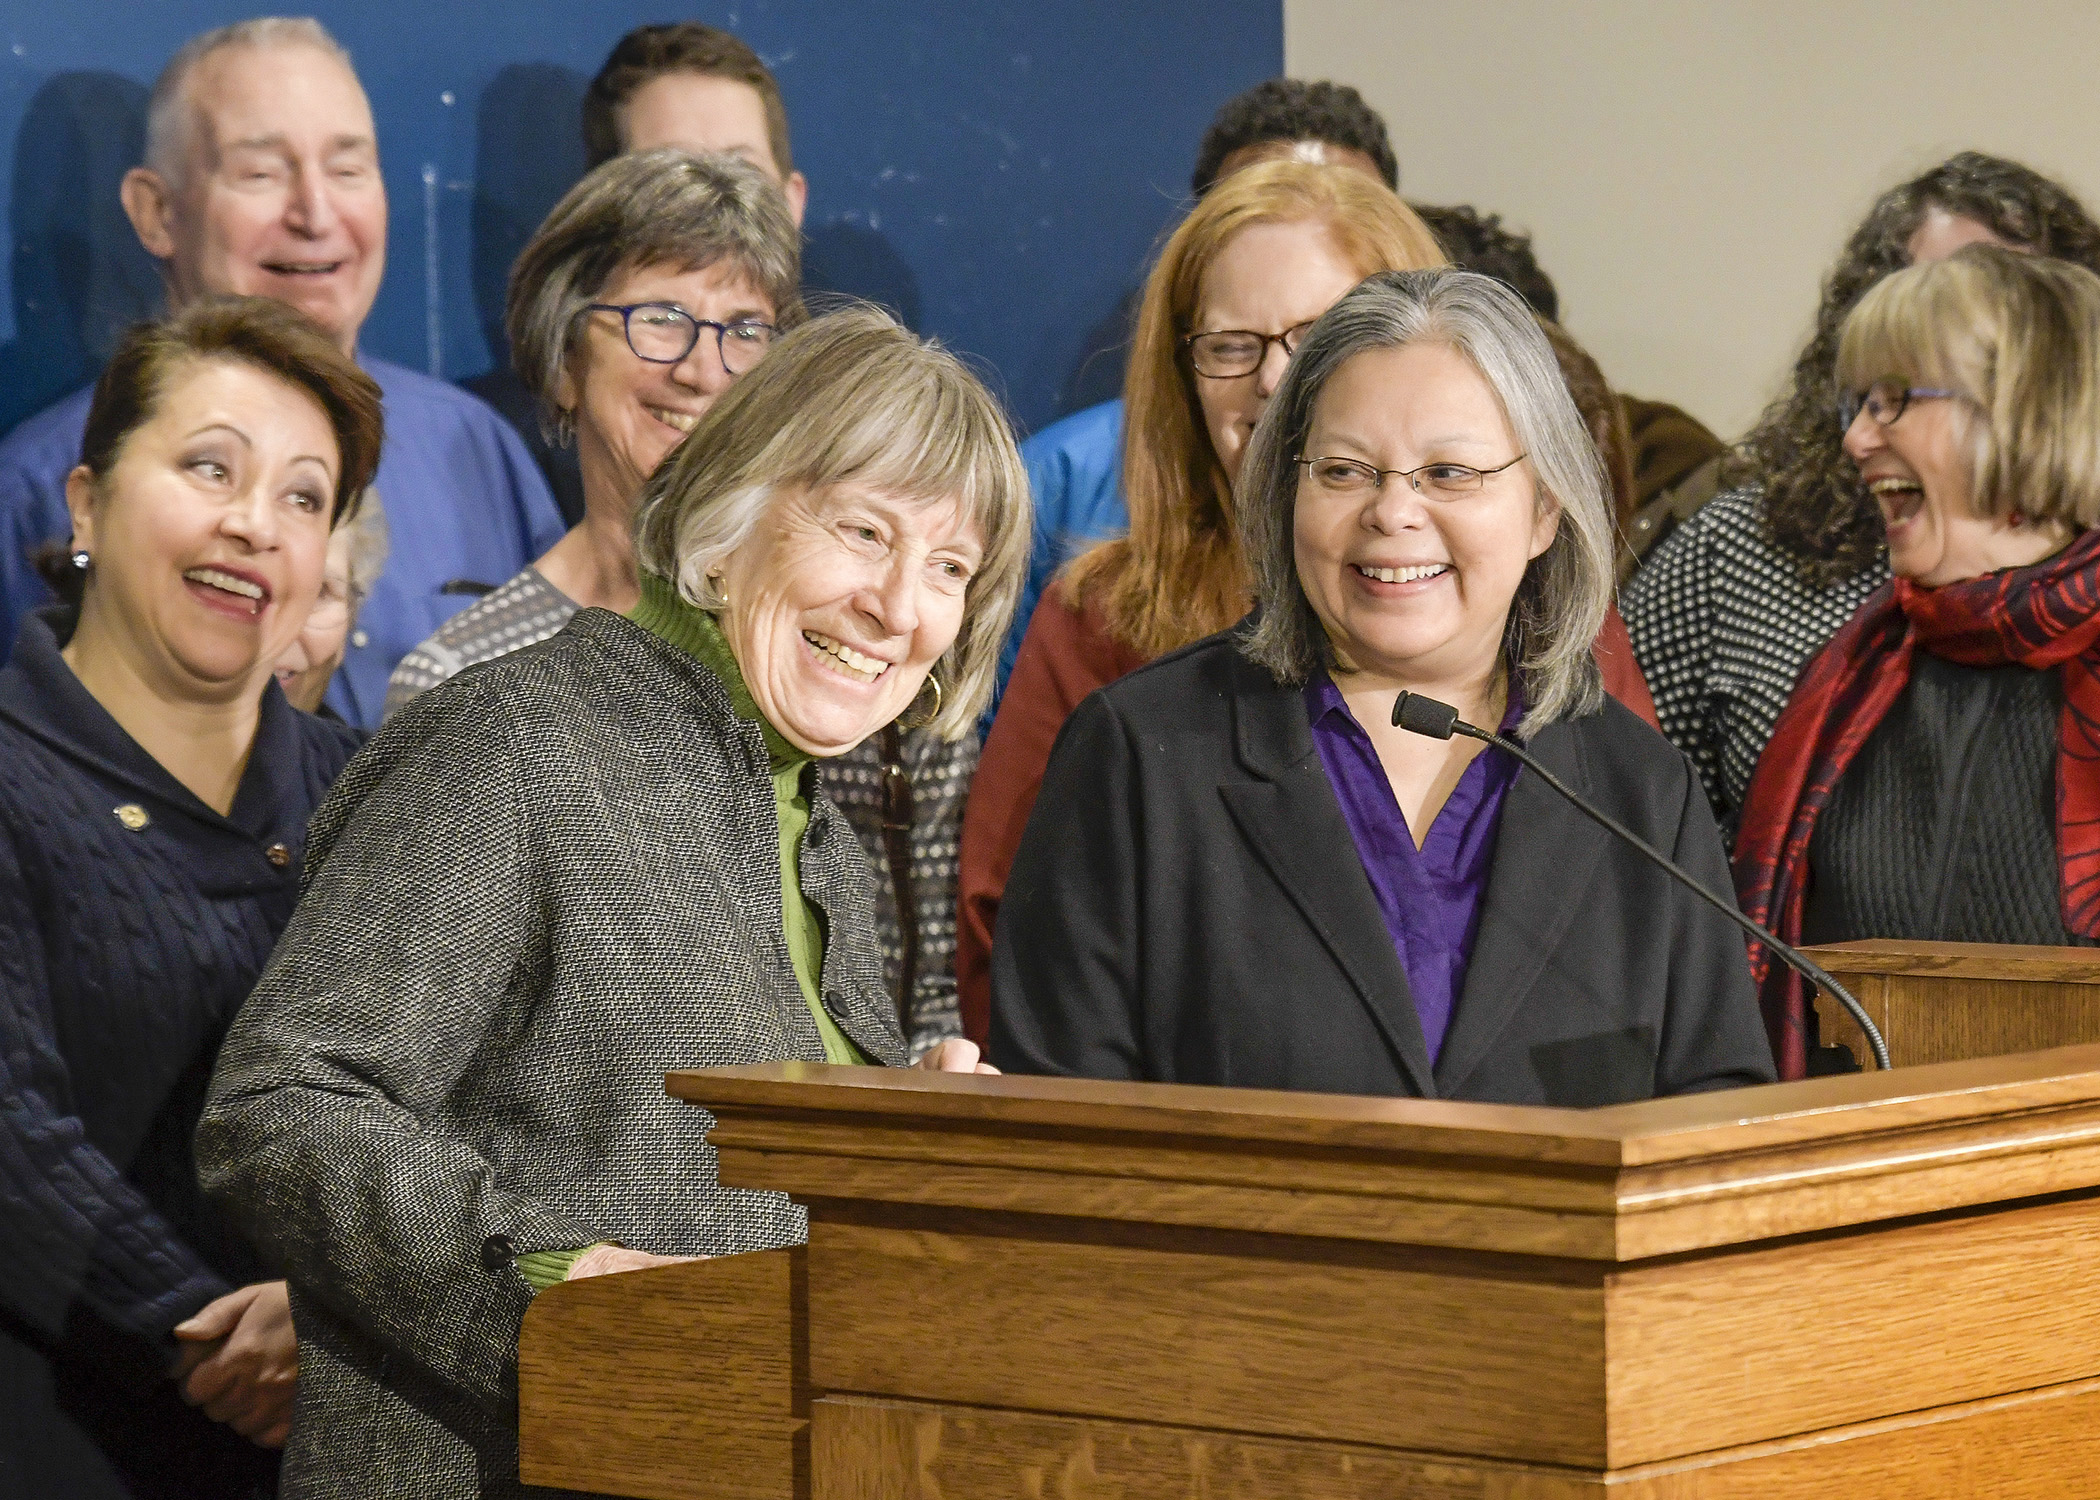 Flanked by family, friends, and colleagues during a joint news conference, Reps. Karen Clark, center left, and Susan Allen, center right, announced Friday they will not seek re-election. Photo by Andrew VonBank